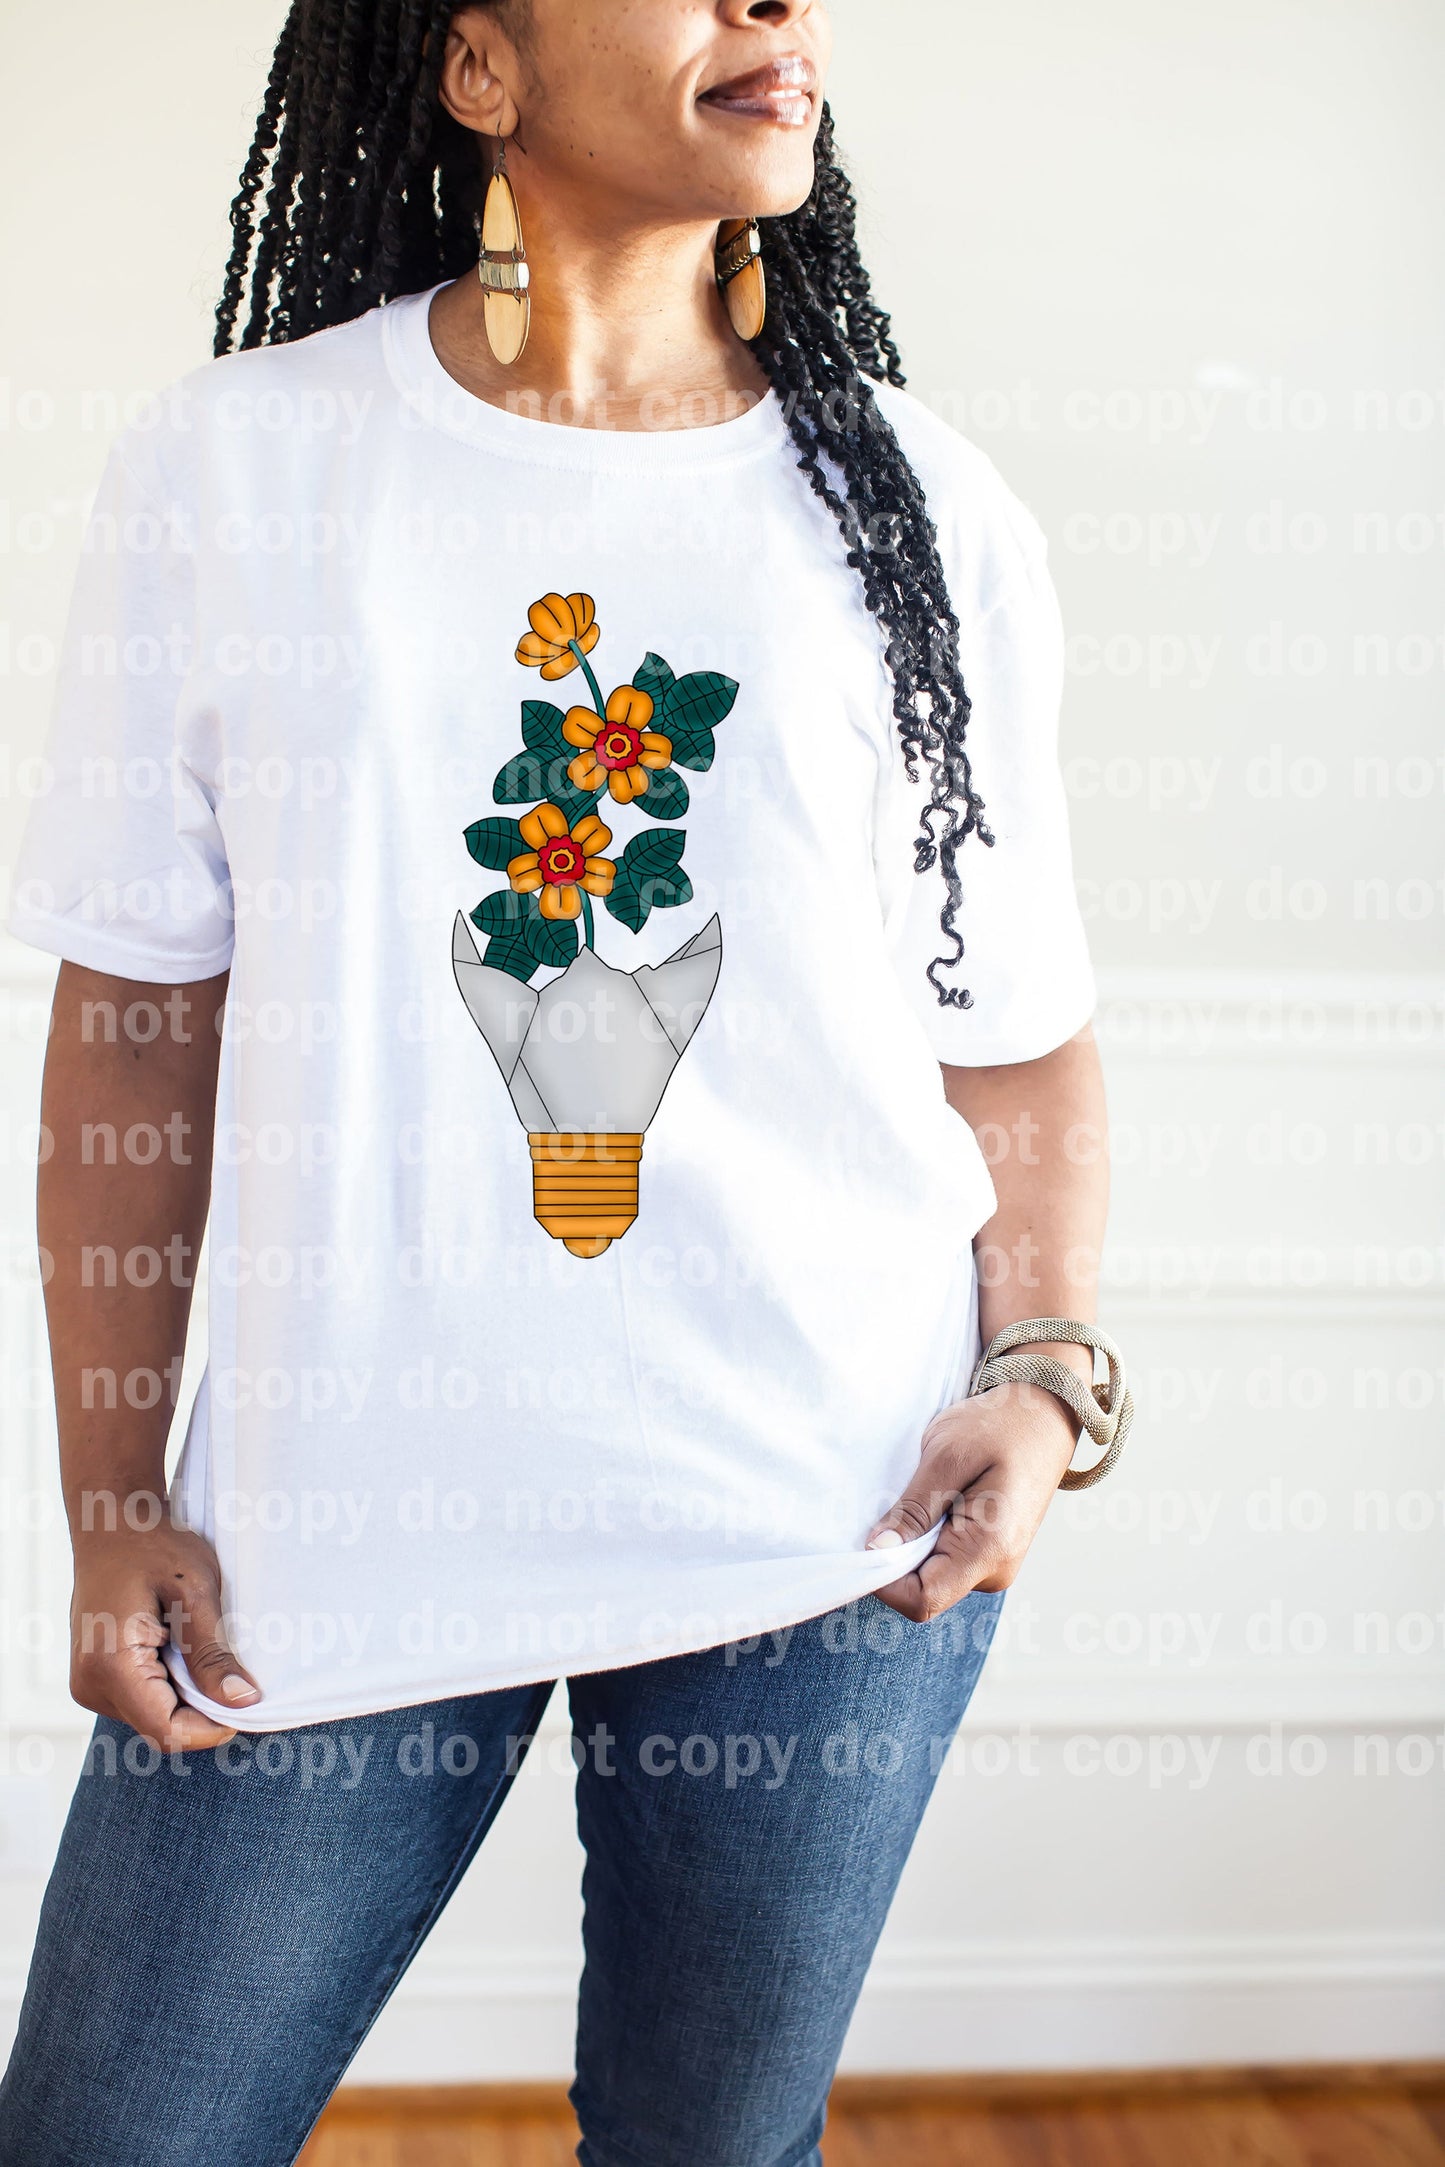 Bulb With Flowers Dream Print or Sublimation Print